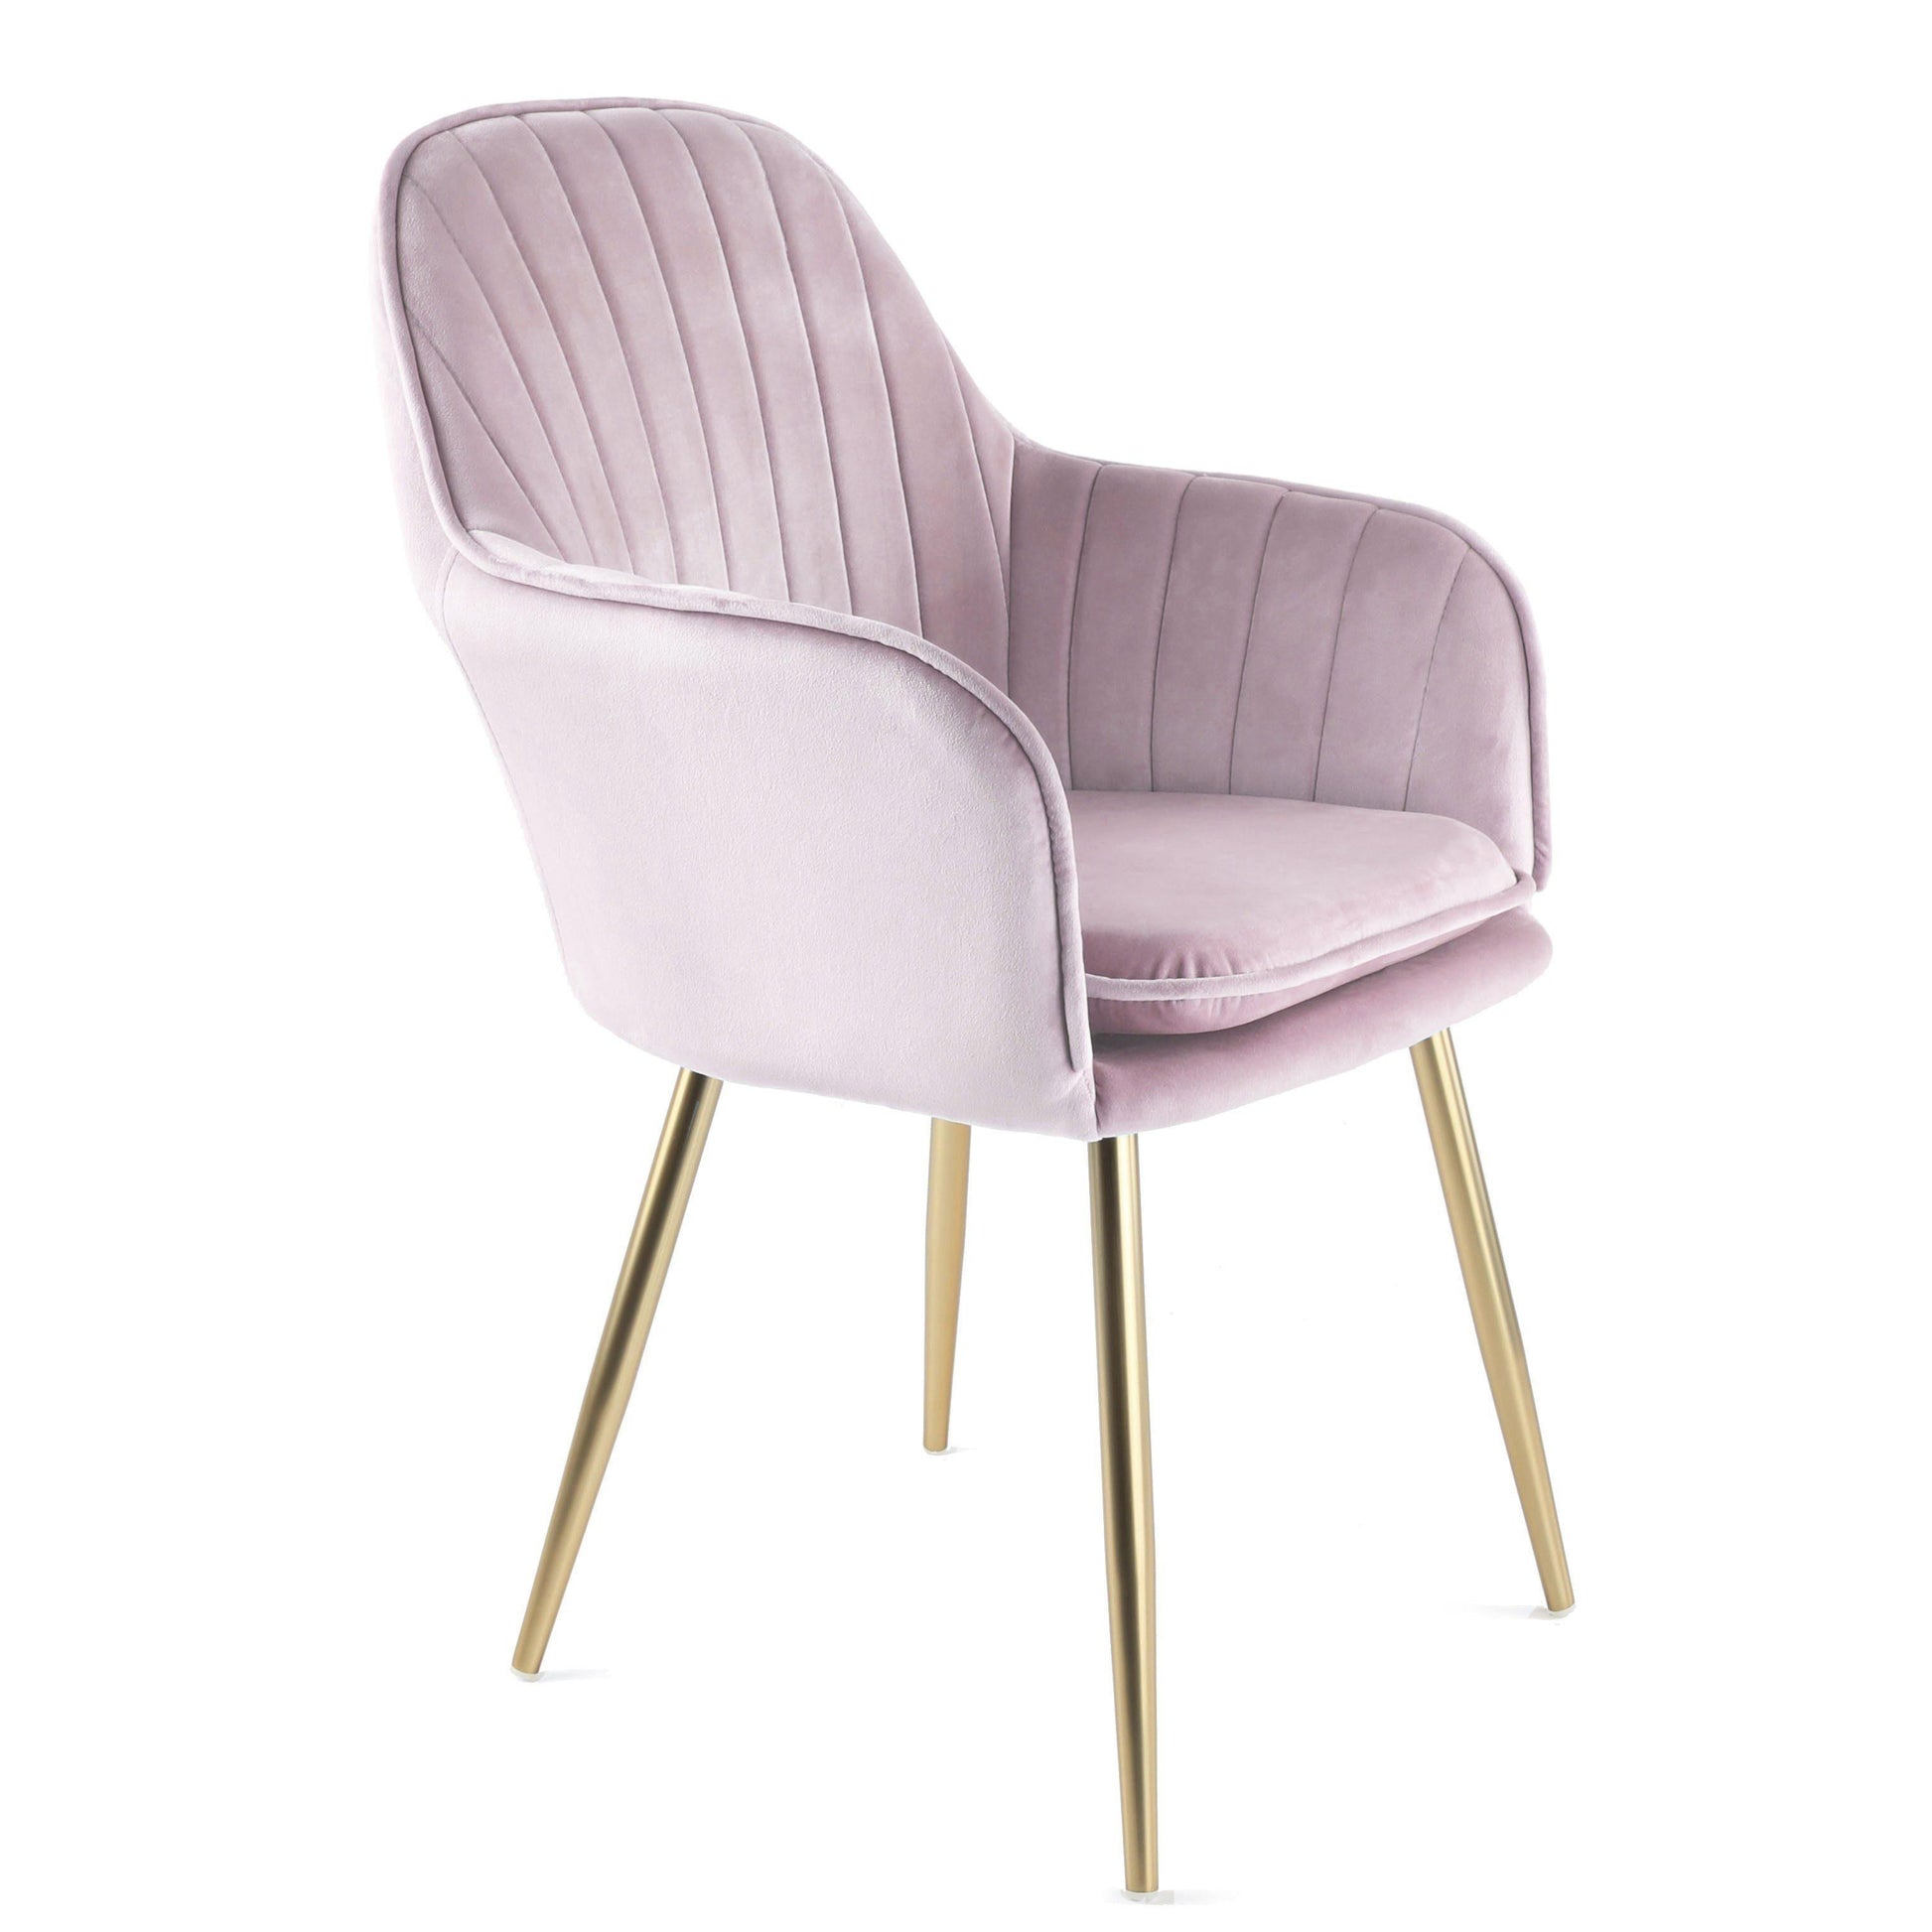 Muse accent chair – pink with gold legs - Laura James